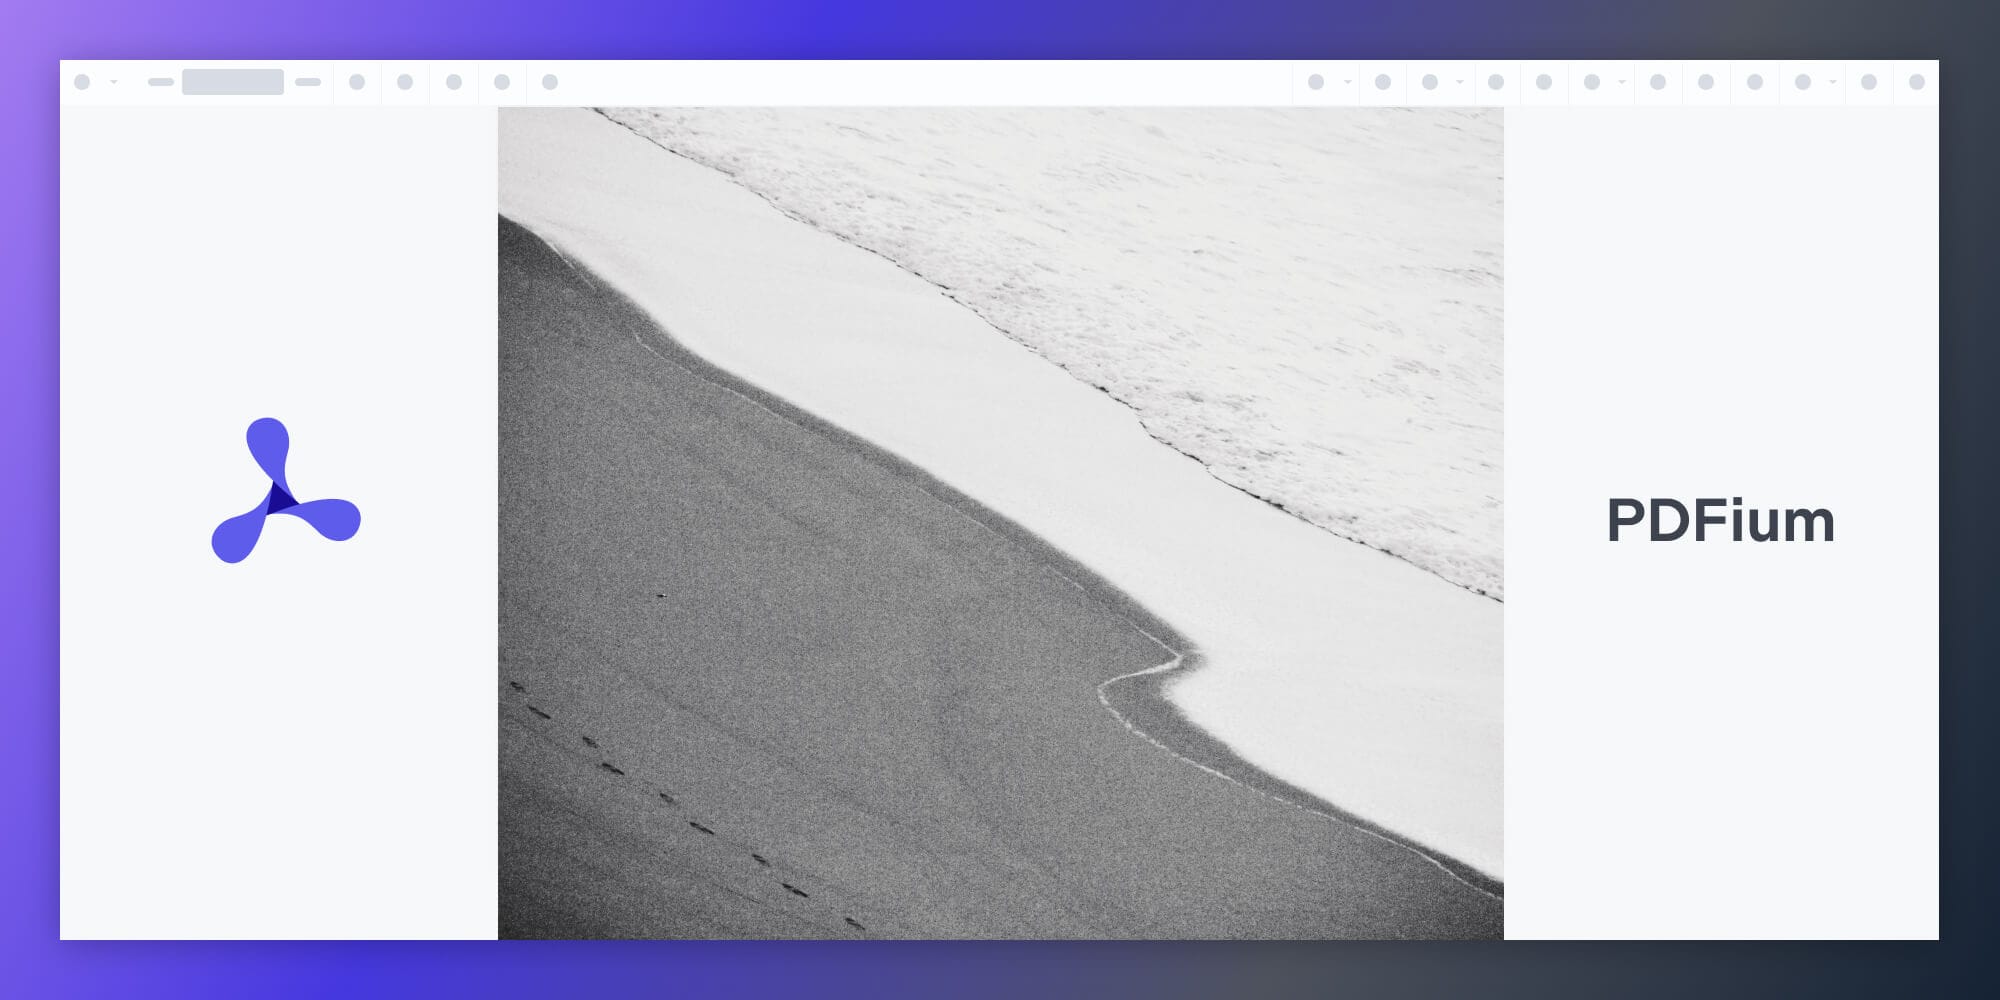 Illustration: How to Build a PDFium Image Viewer with PSPDFKit